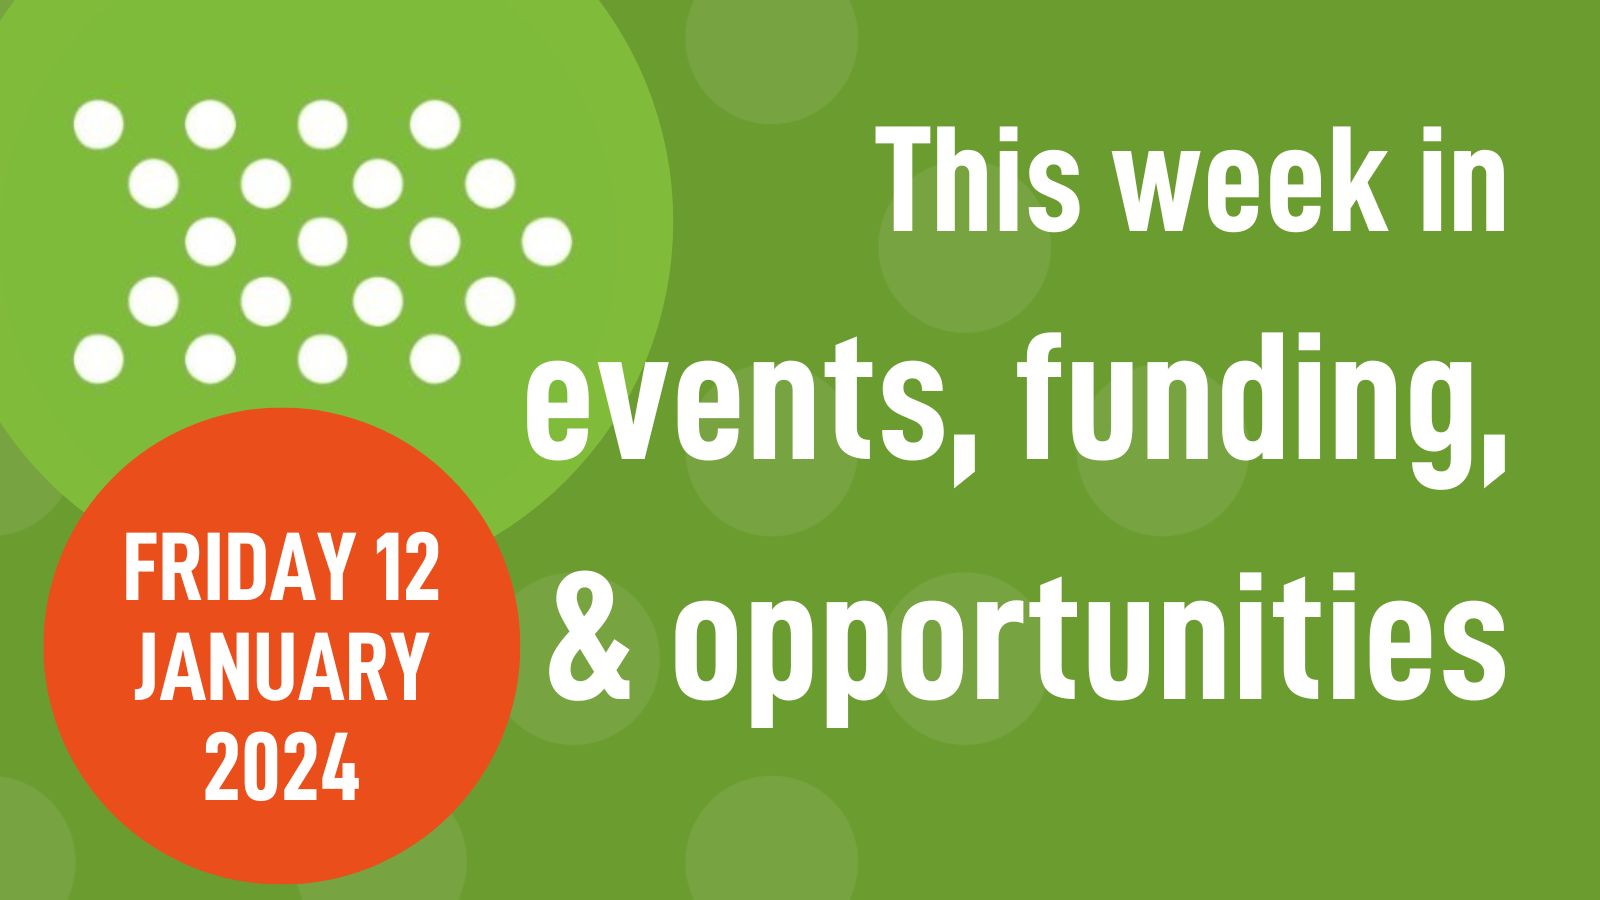 Weekly roundup 12/01/24: events, funding, & opportunities in mental health research